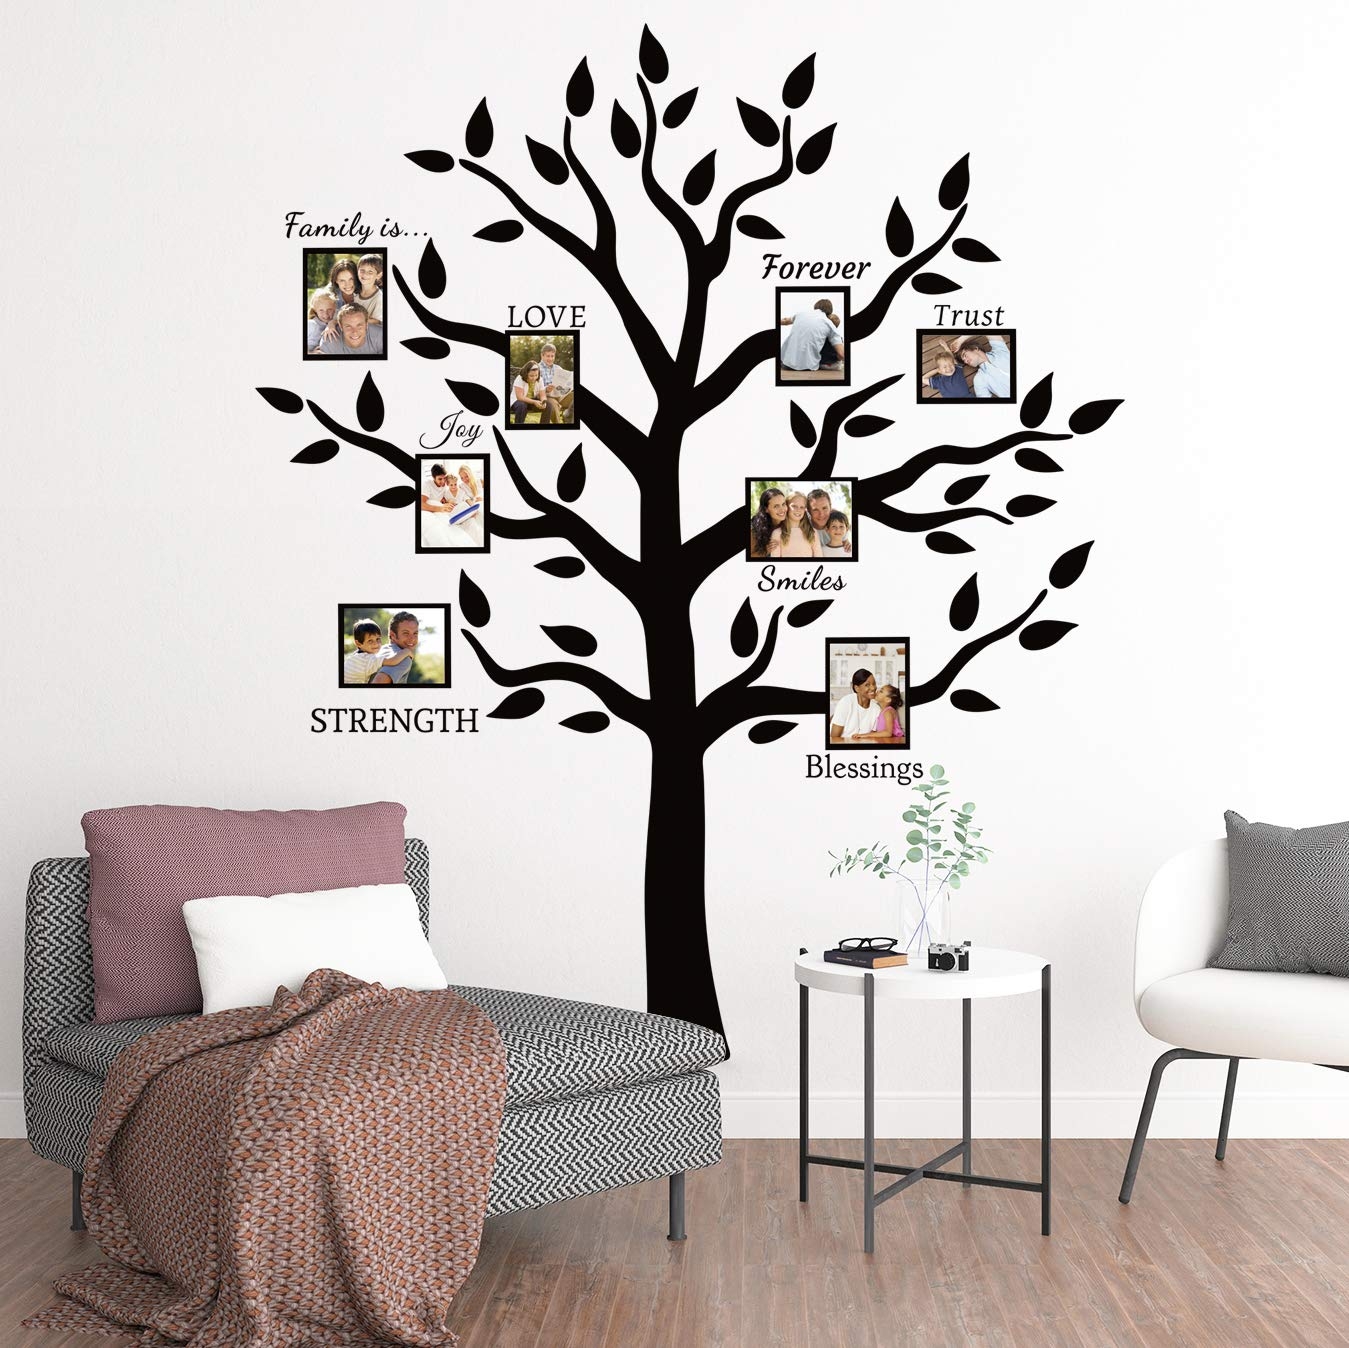 2 Sheets Family is Everything Wall Decal with Enjoy The Little Things Vinyl Wall Decor Inspiration Wall Art Sayings Vinyl Sticker Decor of Living Room Home Decor 